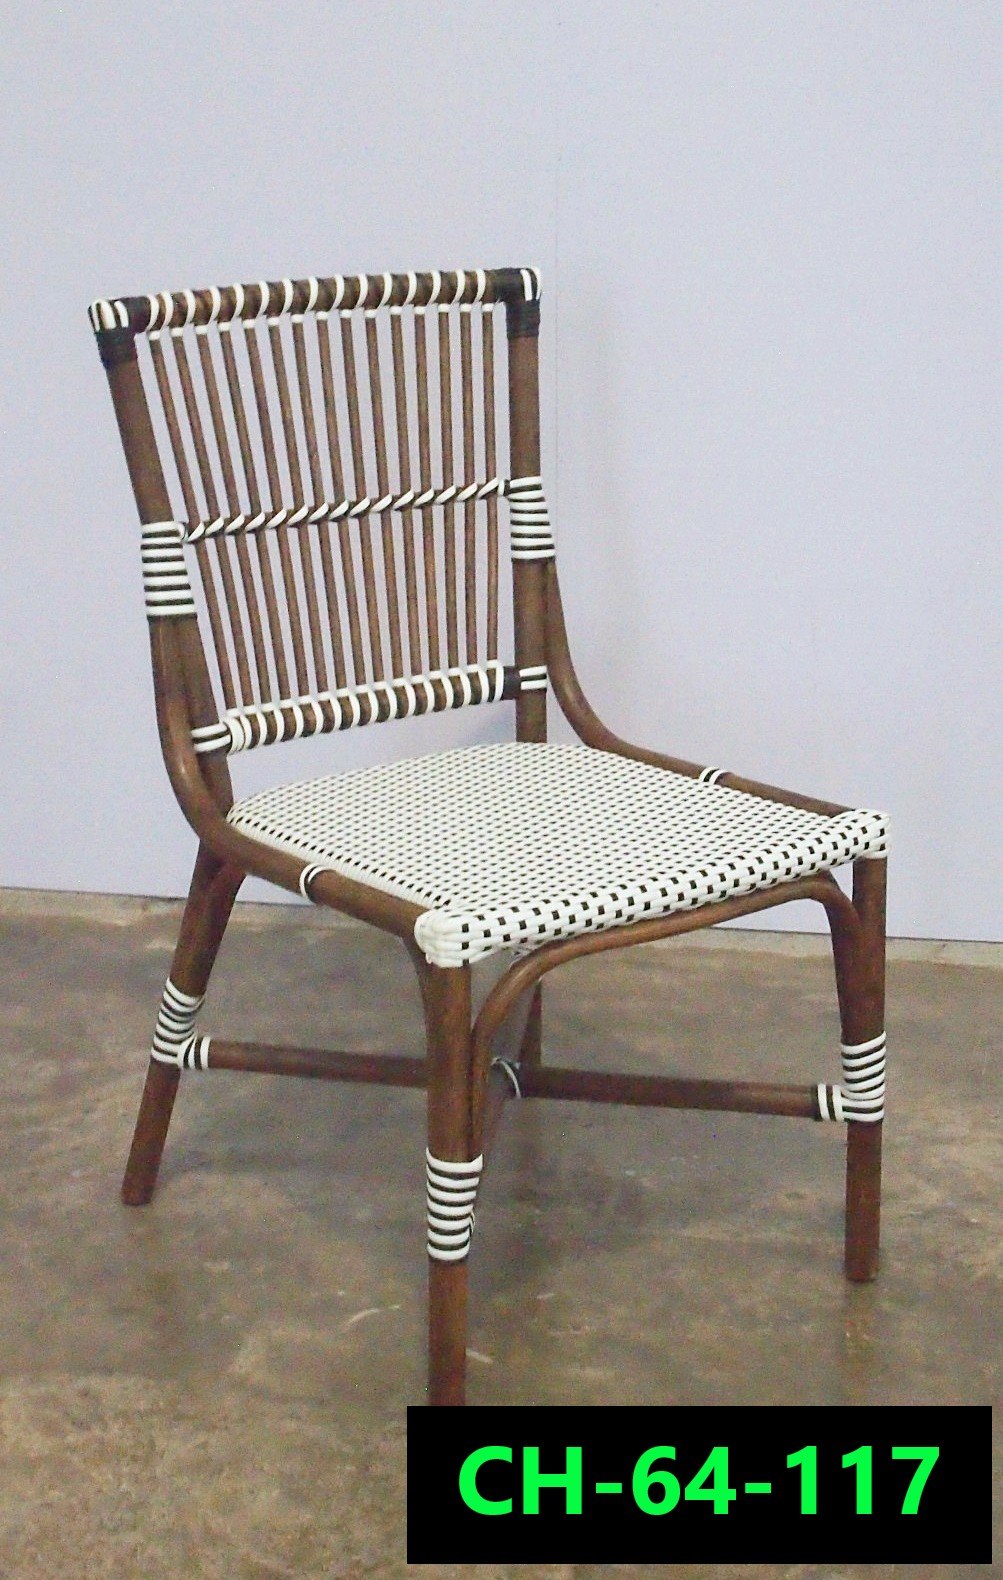 Rattan Chair set Product code CH-64-117